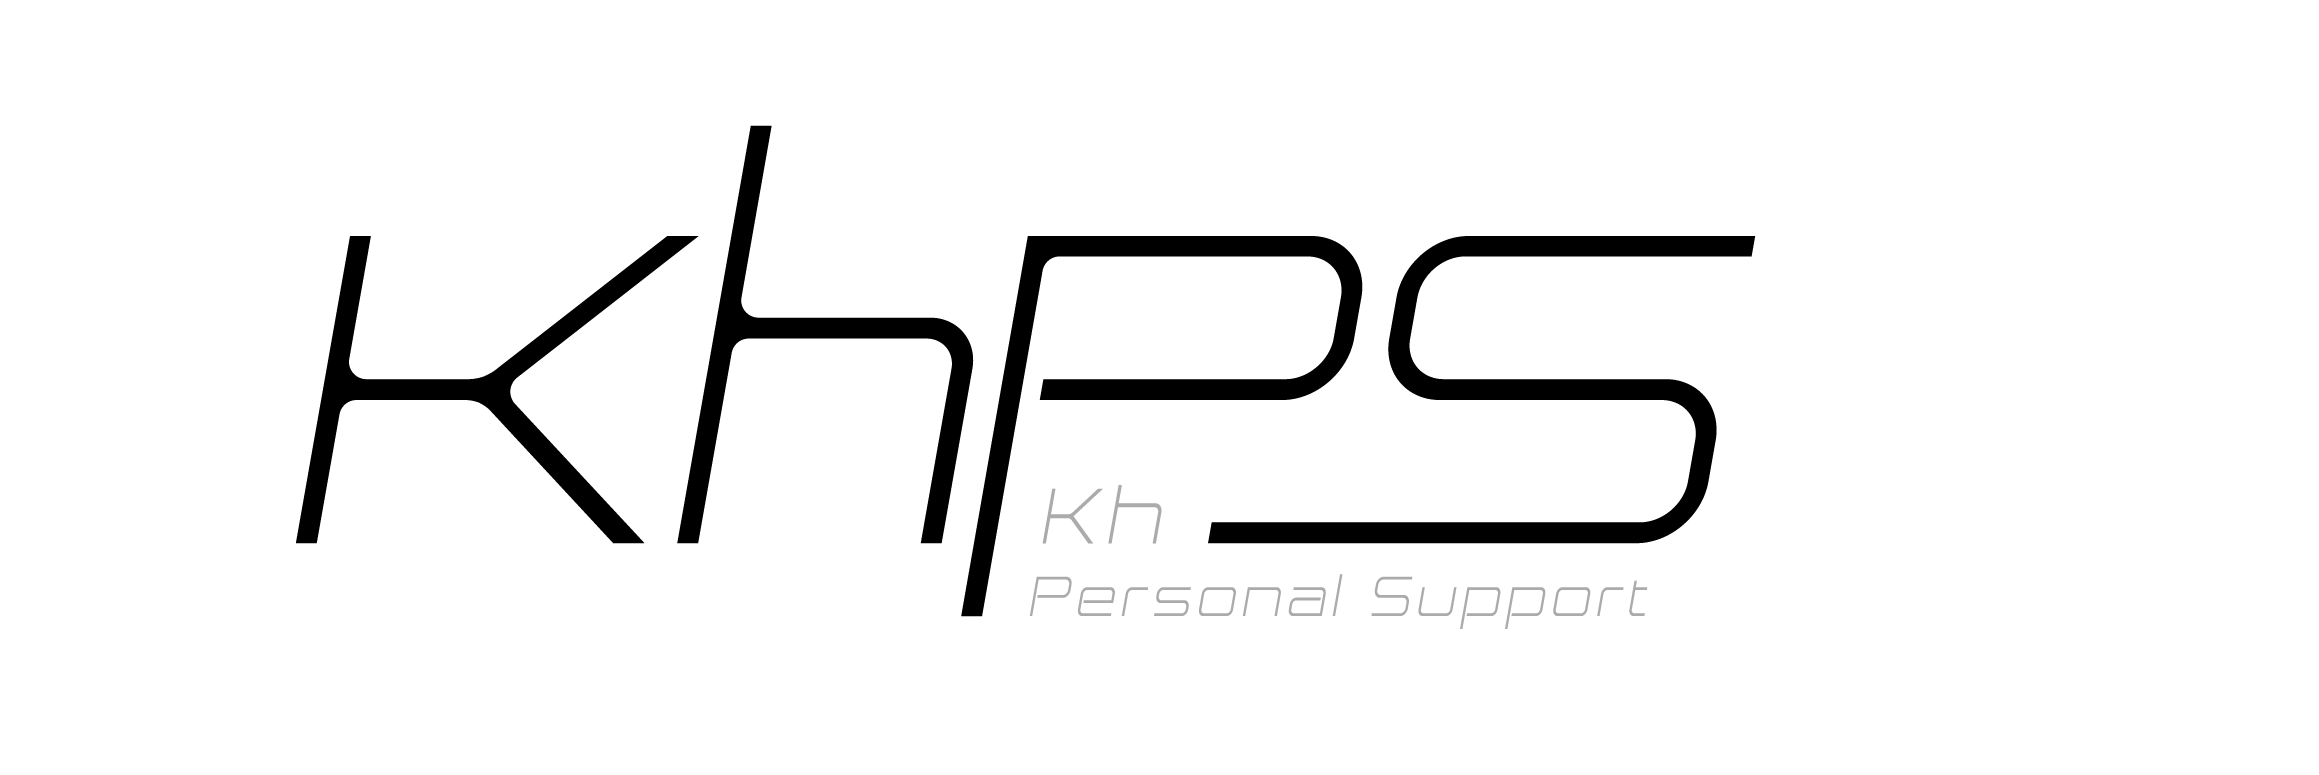 kh personal support